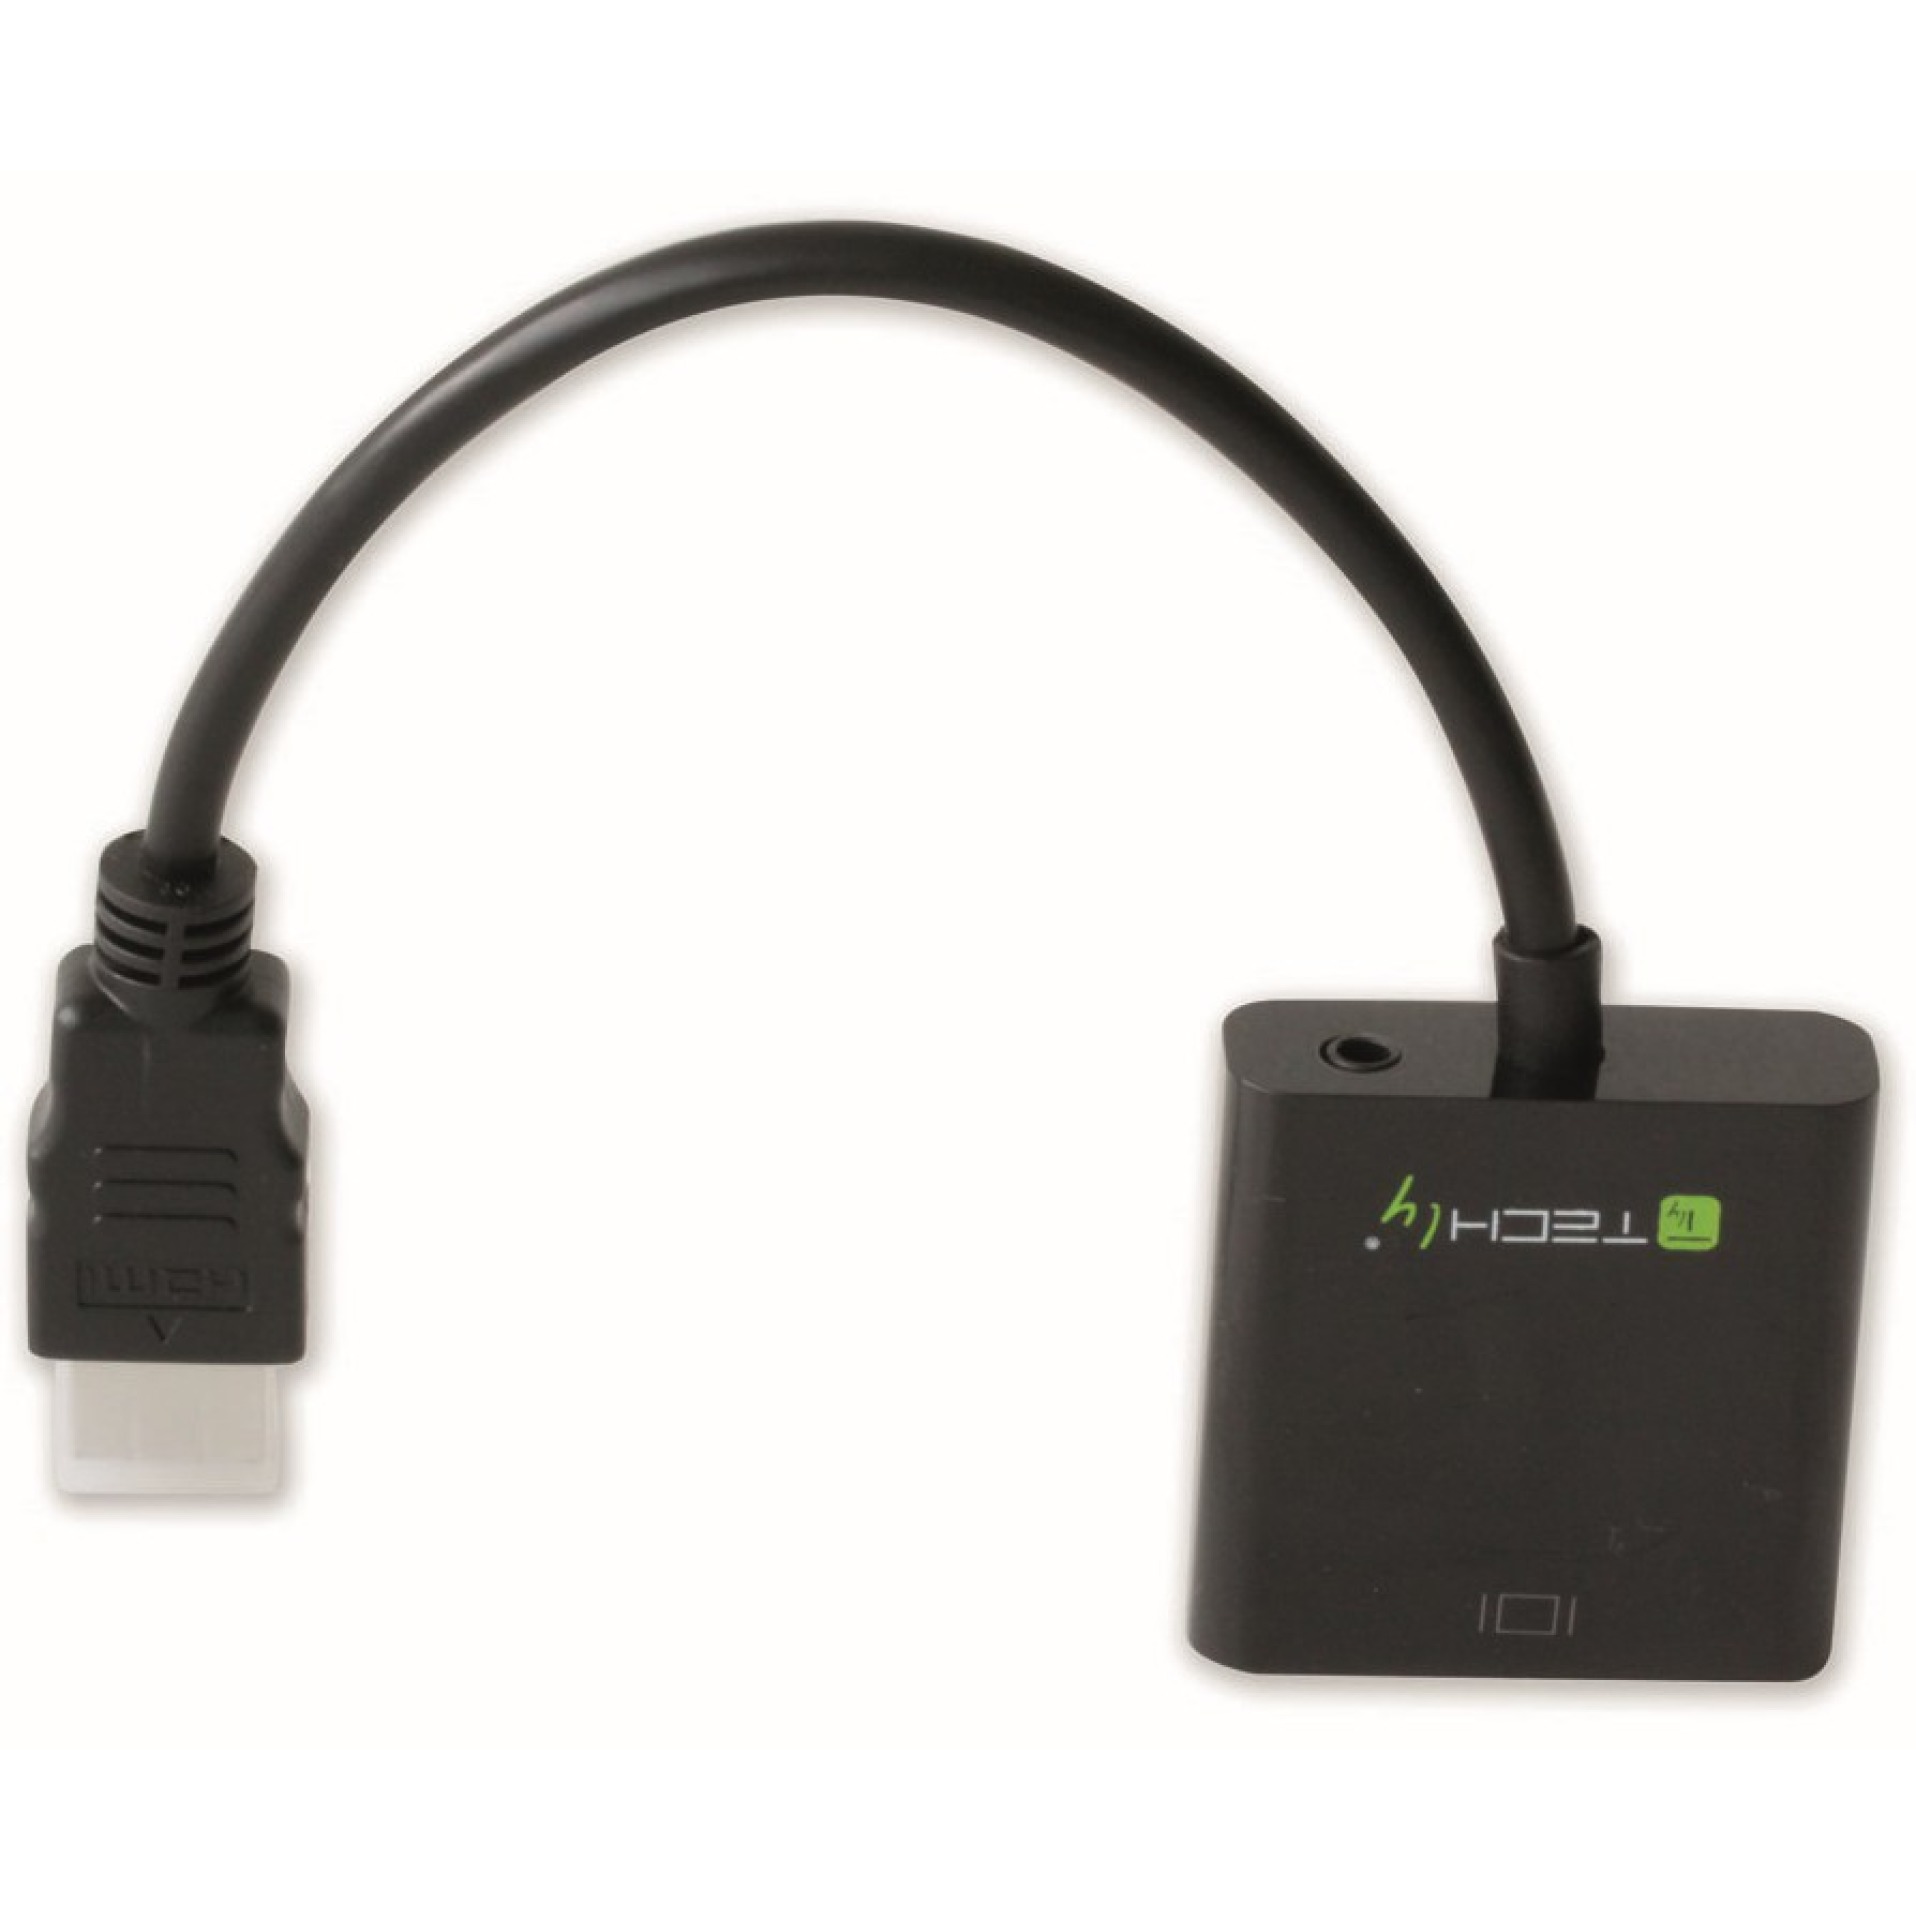 Cable Converter Adapter HDMI to VGA with Audio